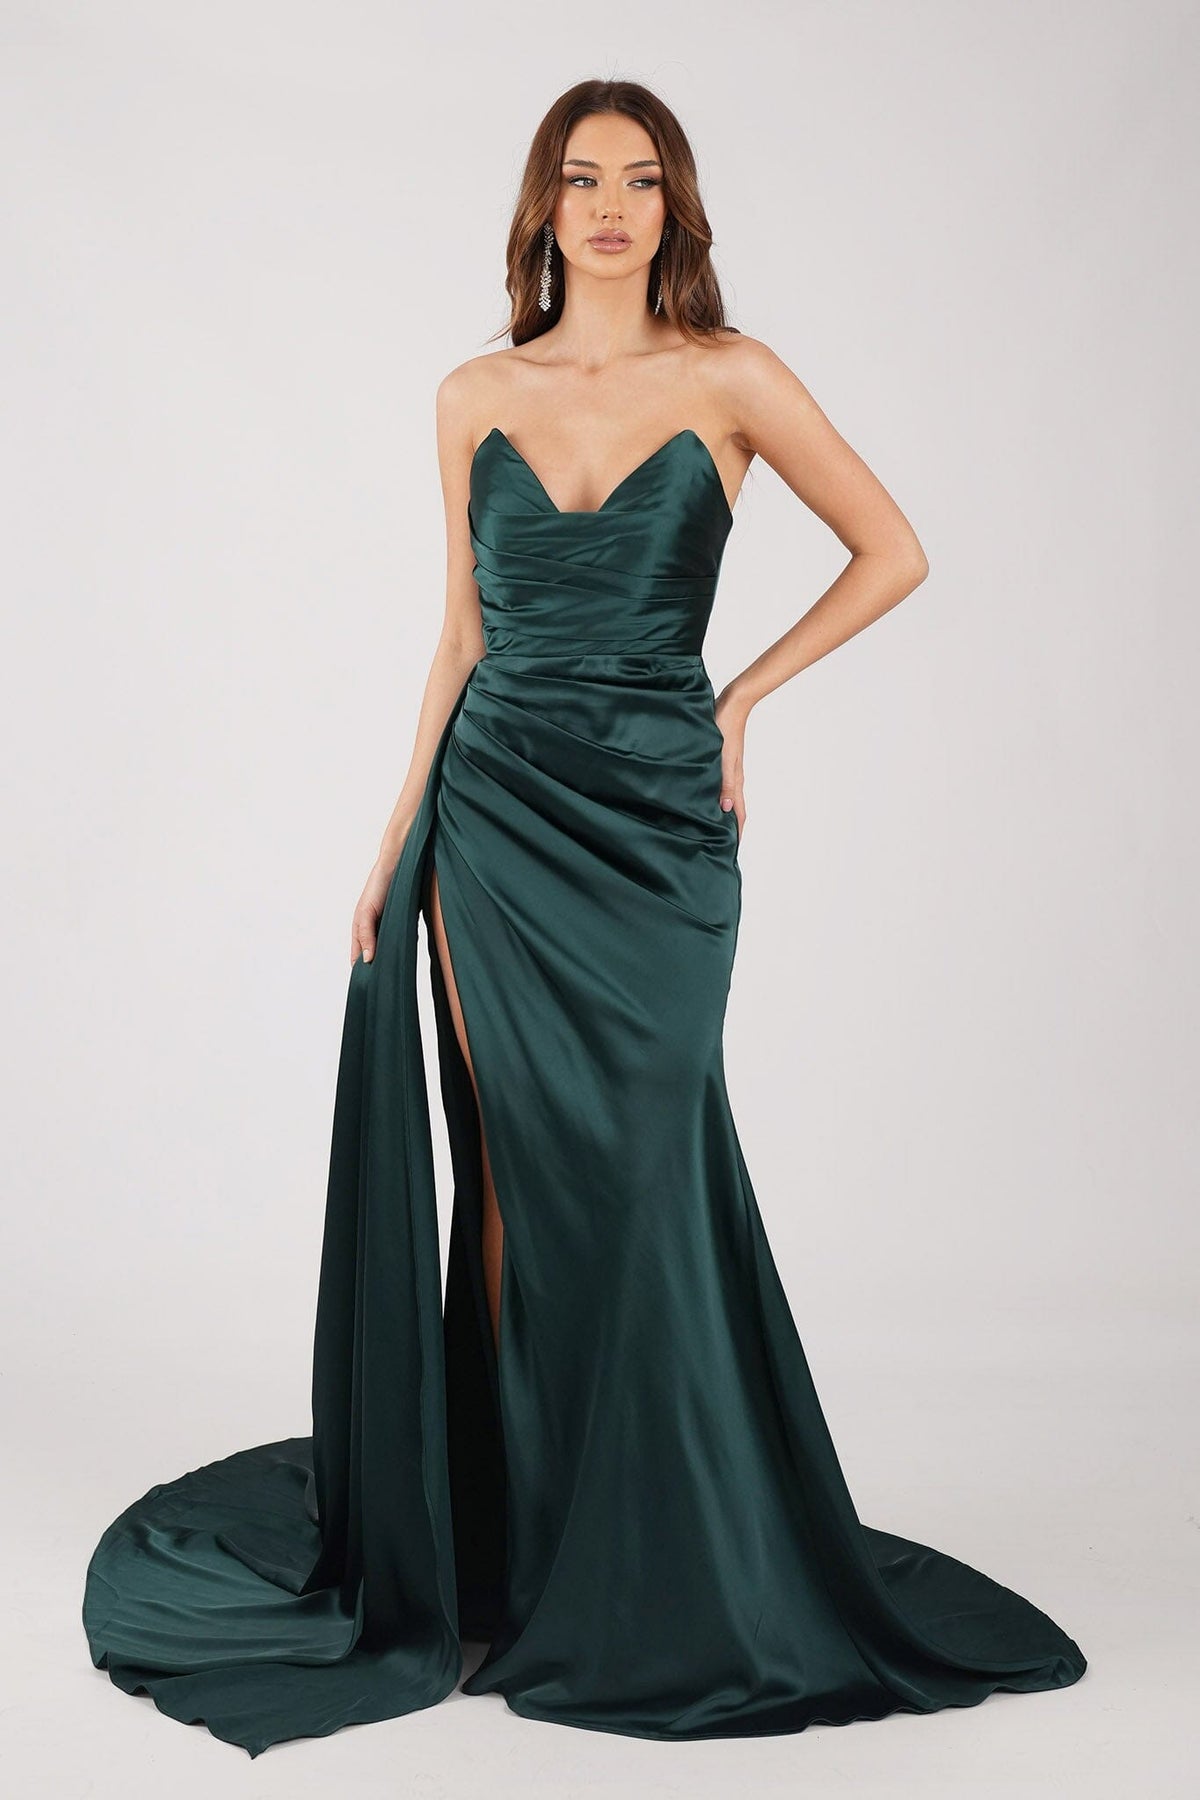 Emerald Green Satin Evening Gown with Bustier Strapless Neckline, Draped Detail, Thigh High Slit, and Sweep Court Train